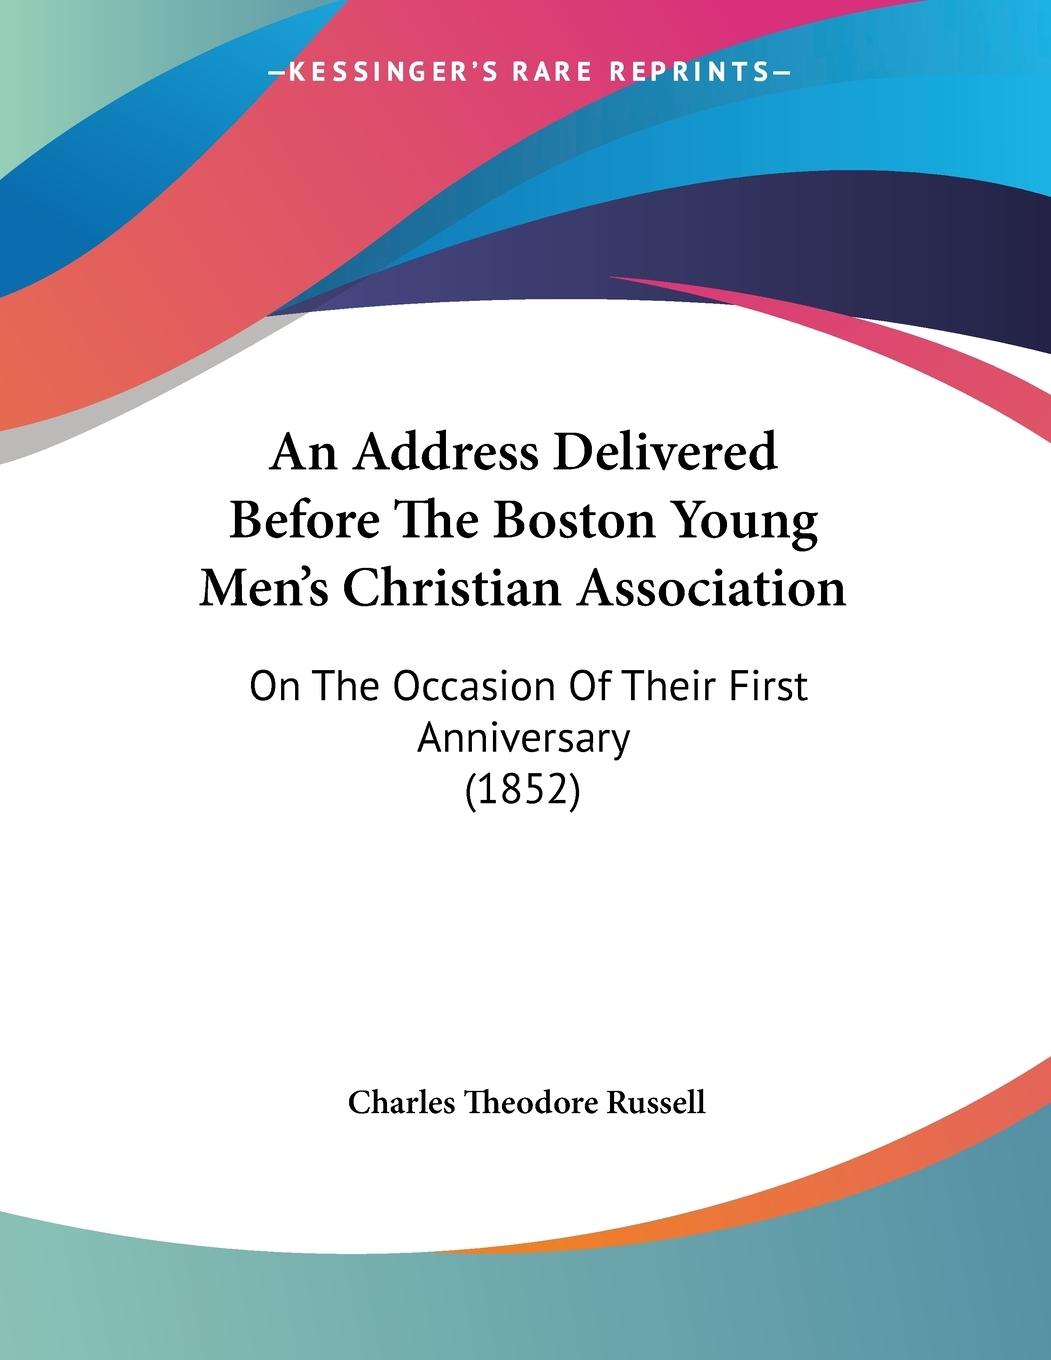 An Address Delivered Before The Boston Young Men s Christian Association - Russell, Charles Theodore